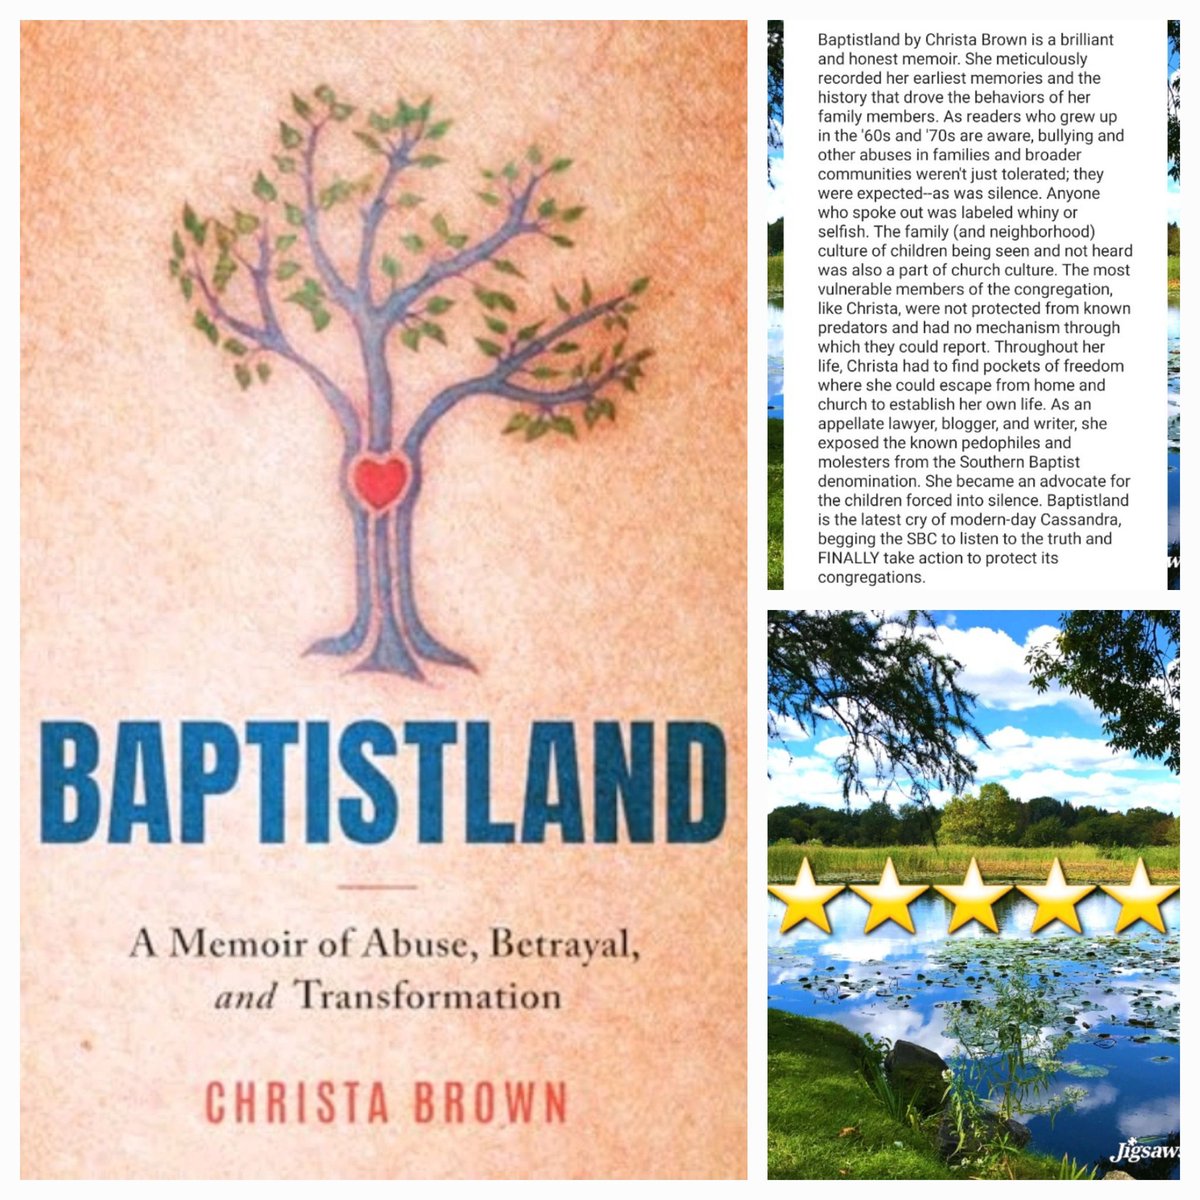 Baptistland by Christa Brown is a brilliant and honest memoir. She meticulously recorded her earliest memories and the history that drove the behaviors of her family members. As readers who grew up in the '60s and '70s are aware, bullying and other abuses in